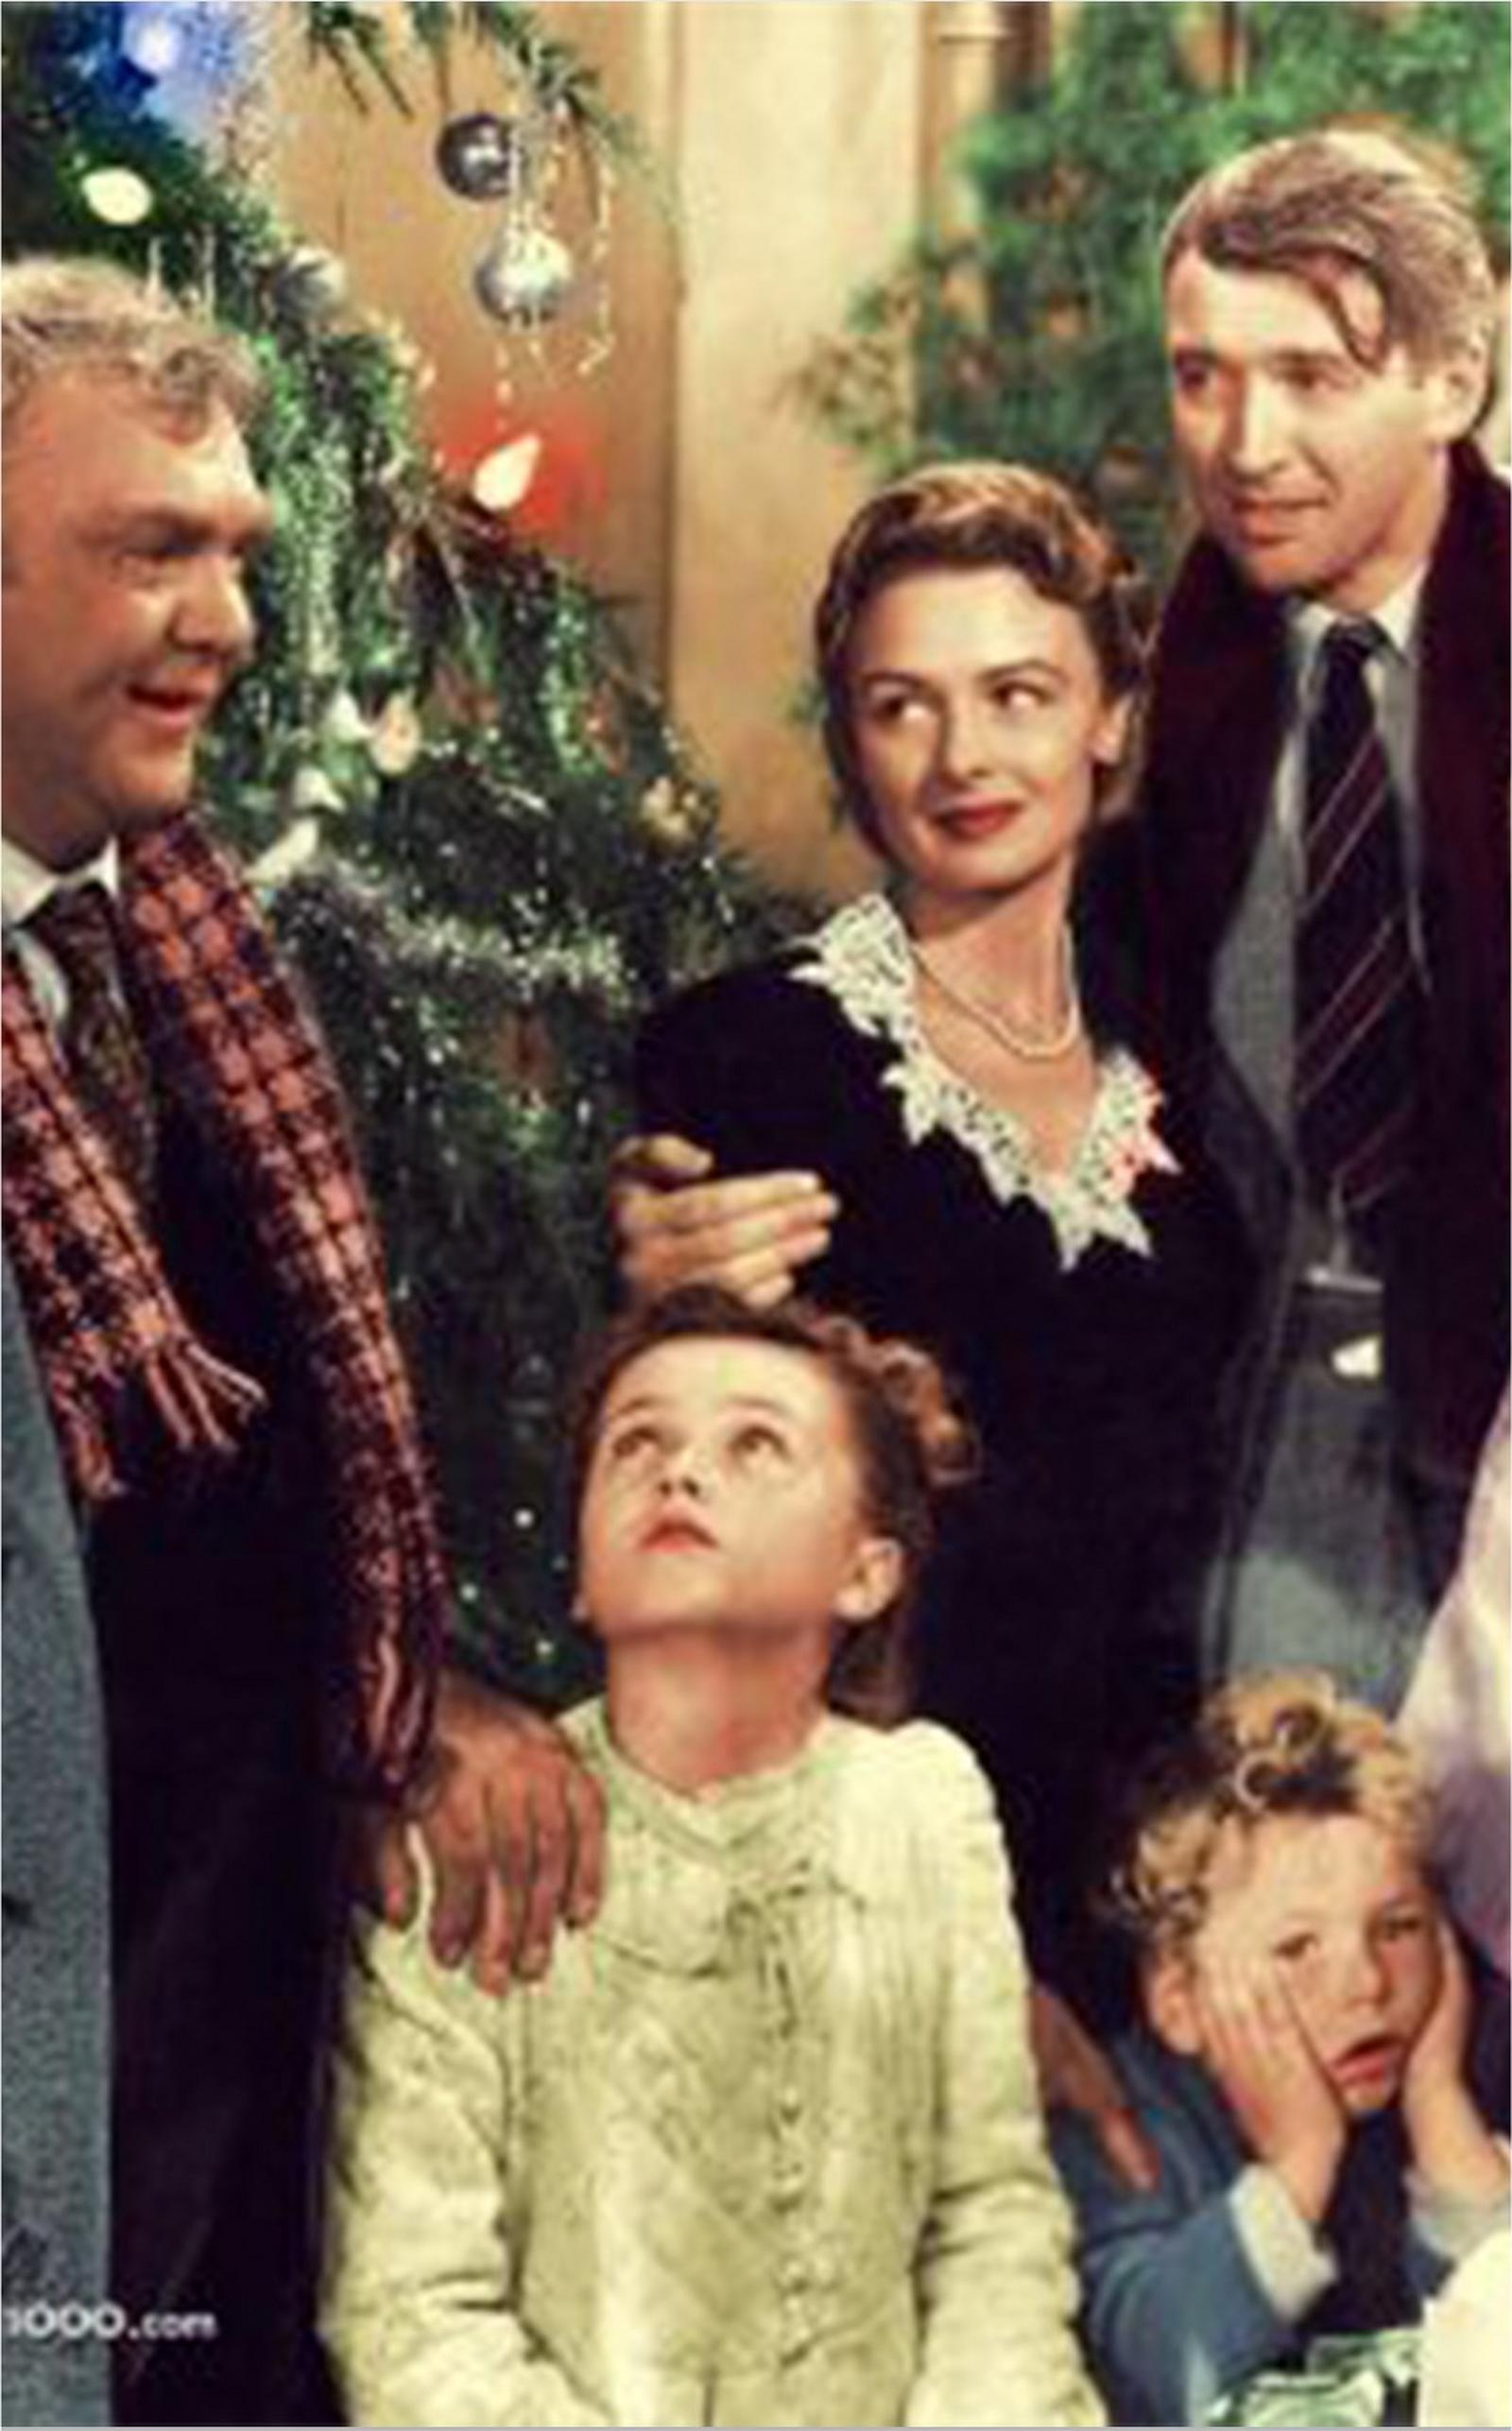 the family from it's a wonderful life. the mother is wearing a floral lined sweater.